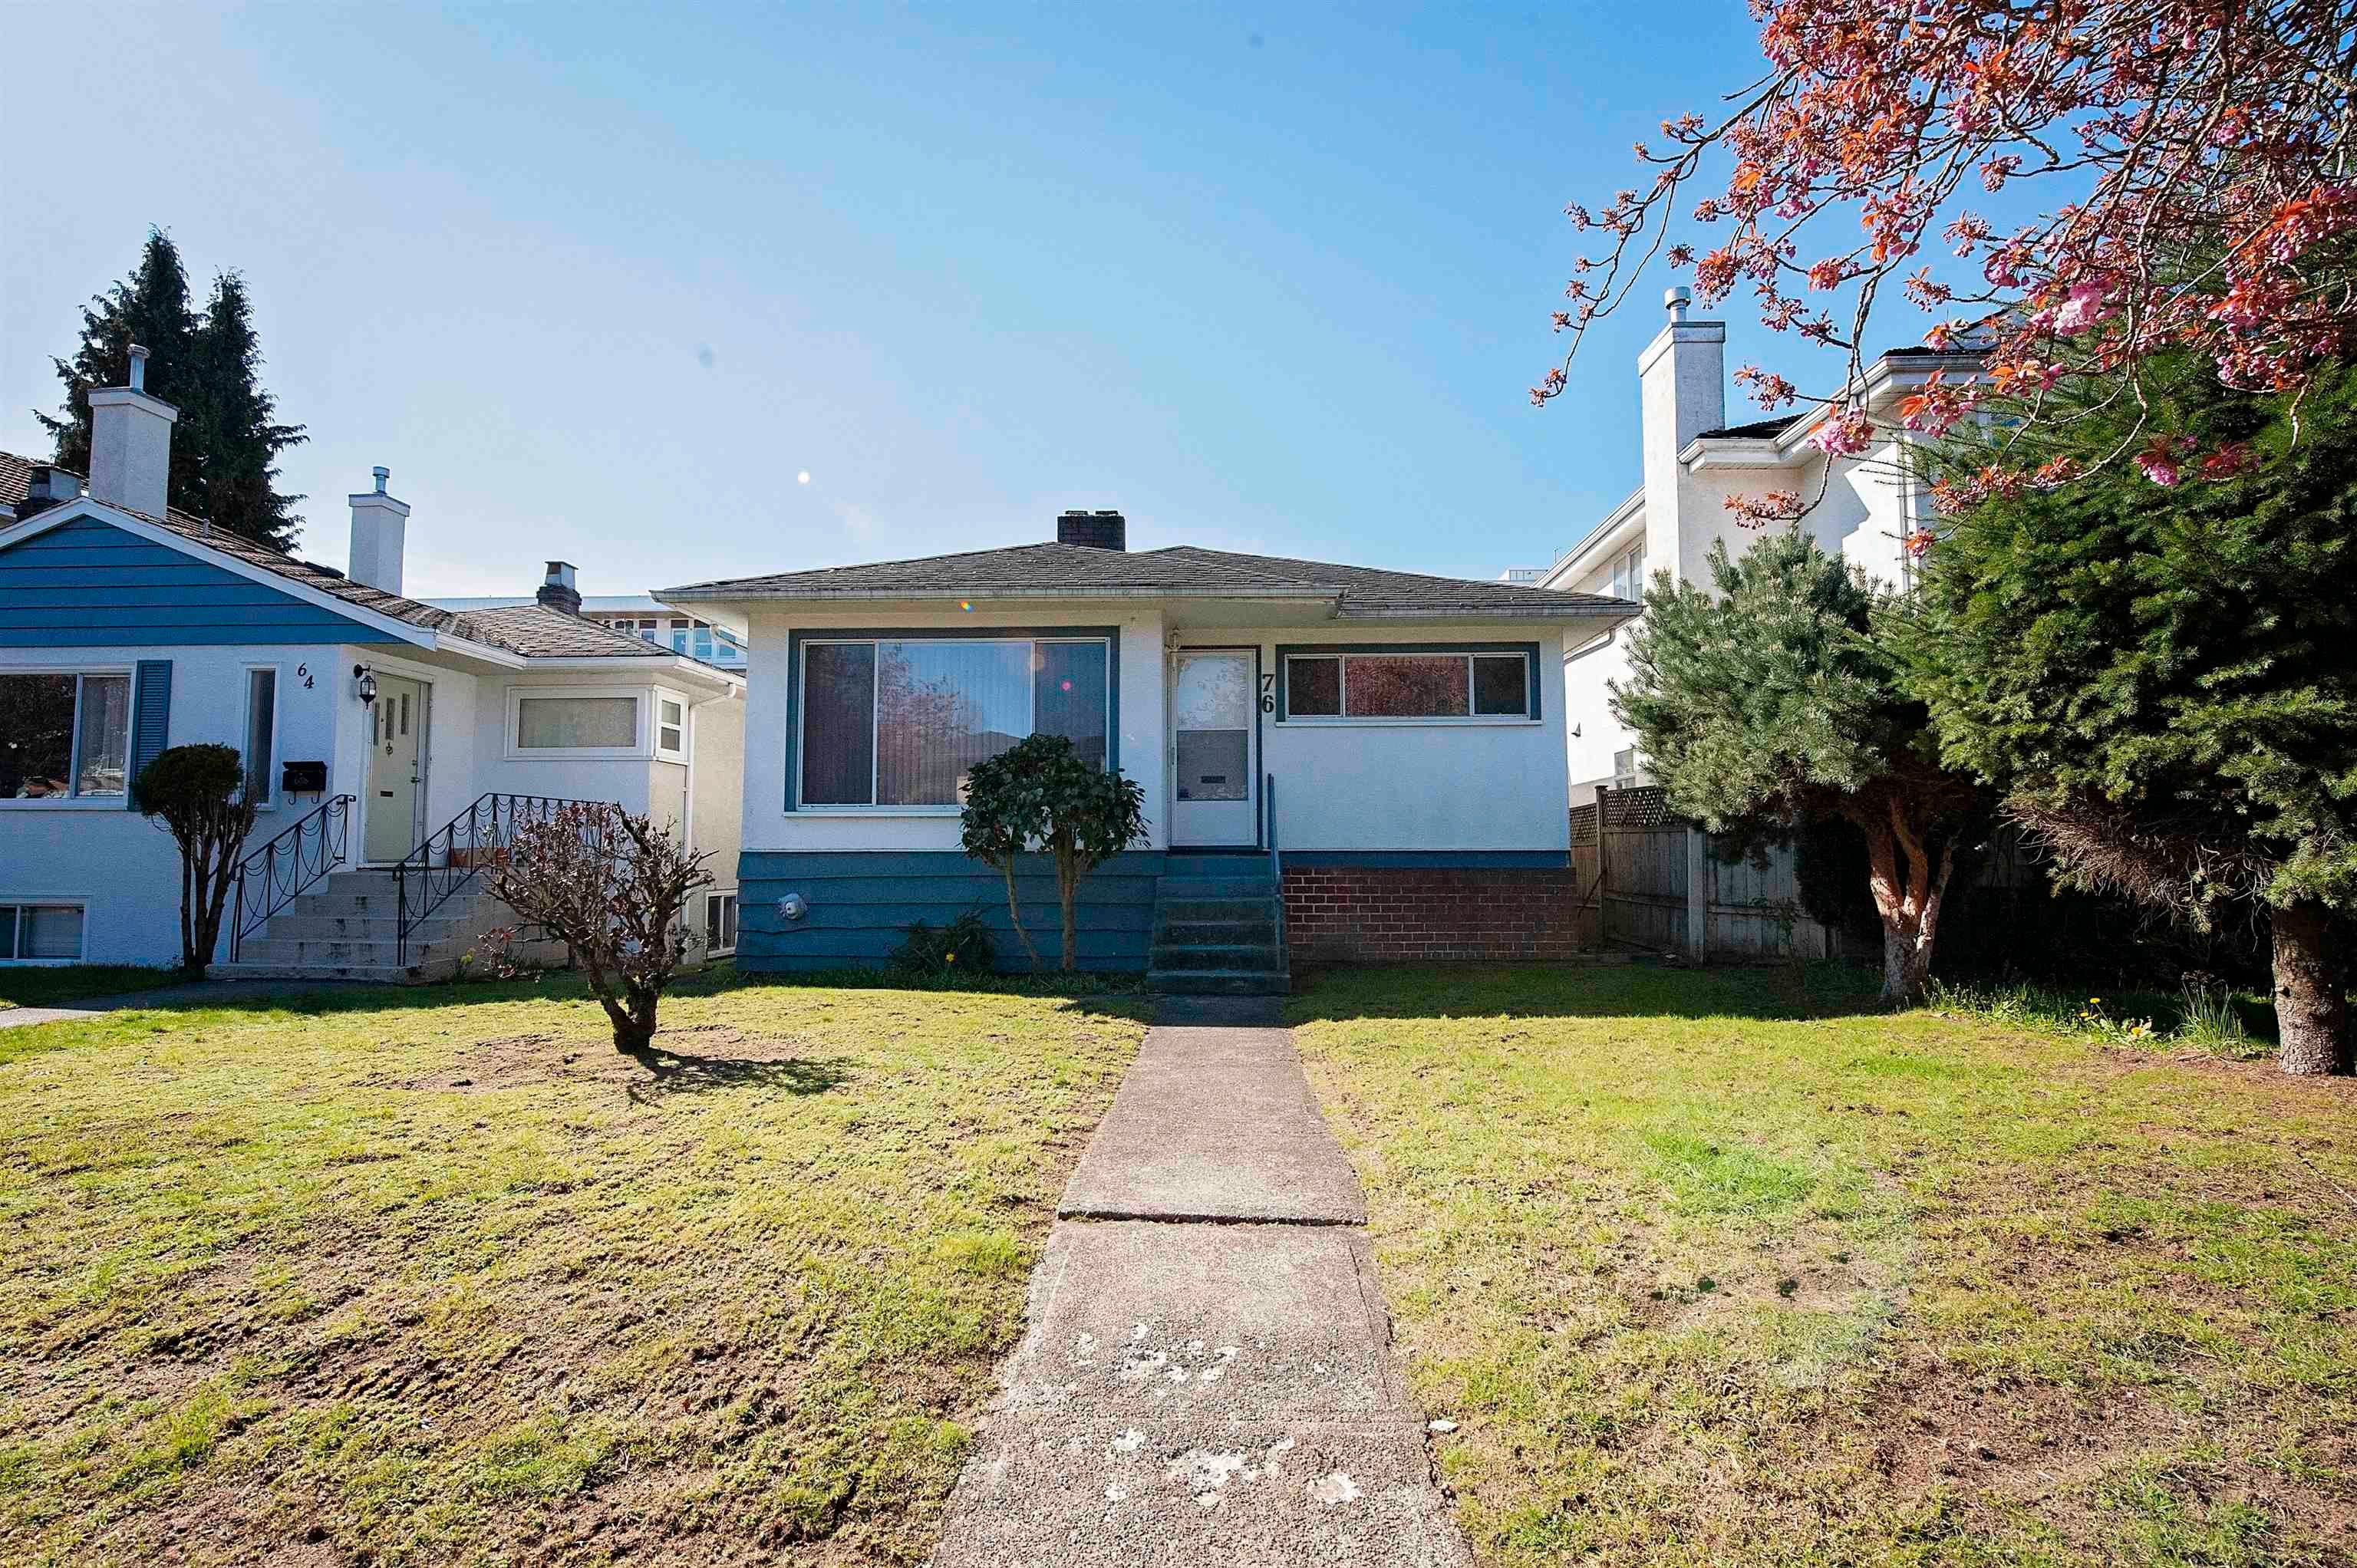 Main Photo: 76 W 63RD Avenue in Vancouver: Marpole House for sale (Vancouver West)  : MLS®# R2676486